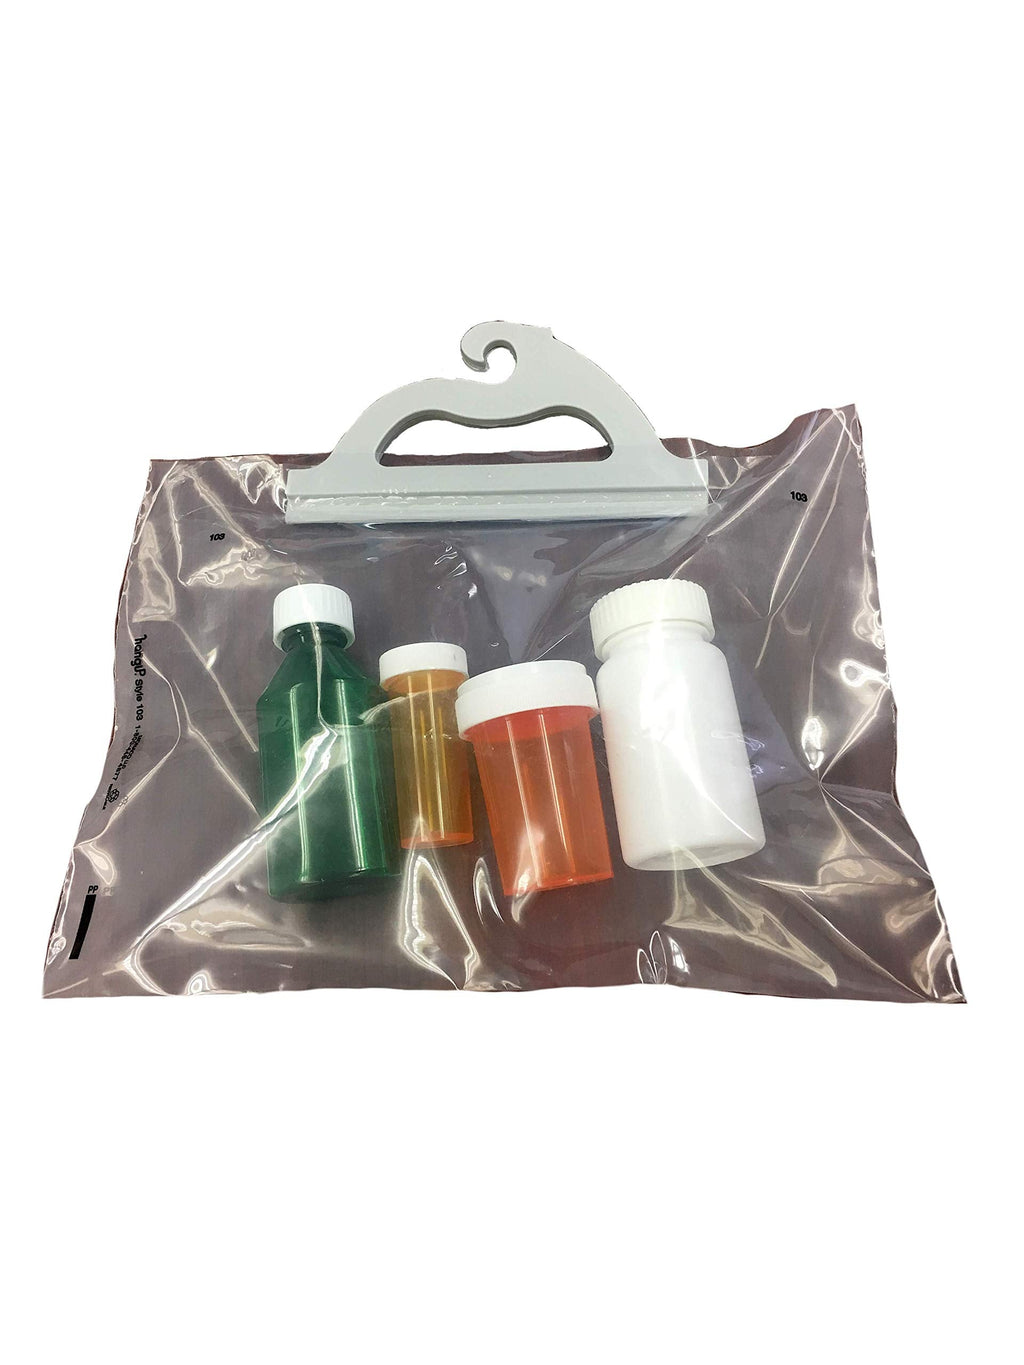  [AUSTRALIA] - Hangup Deluxe Storage Bag - 10 x 7.5 inches - Clear with White Handle - Pack of 5 by AmexDrug (Hanging Storage Bag, Portable)